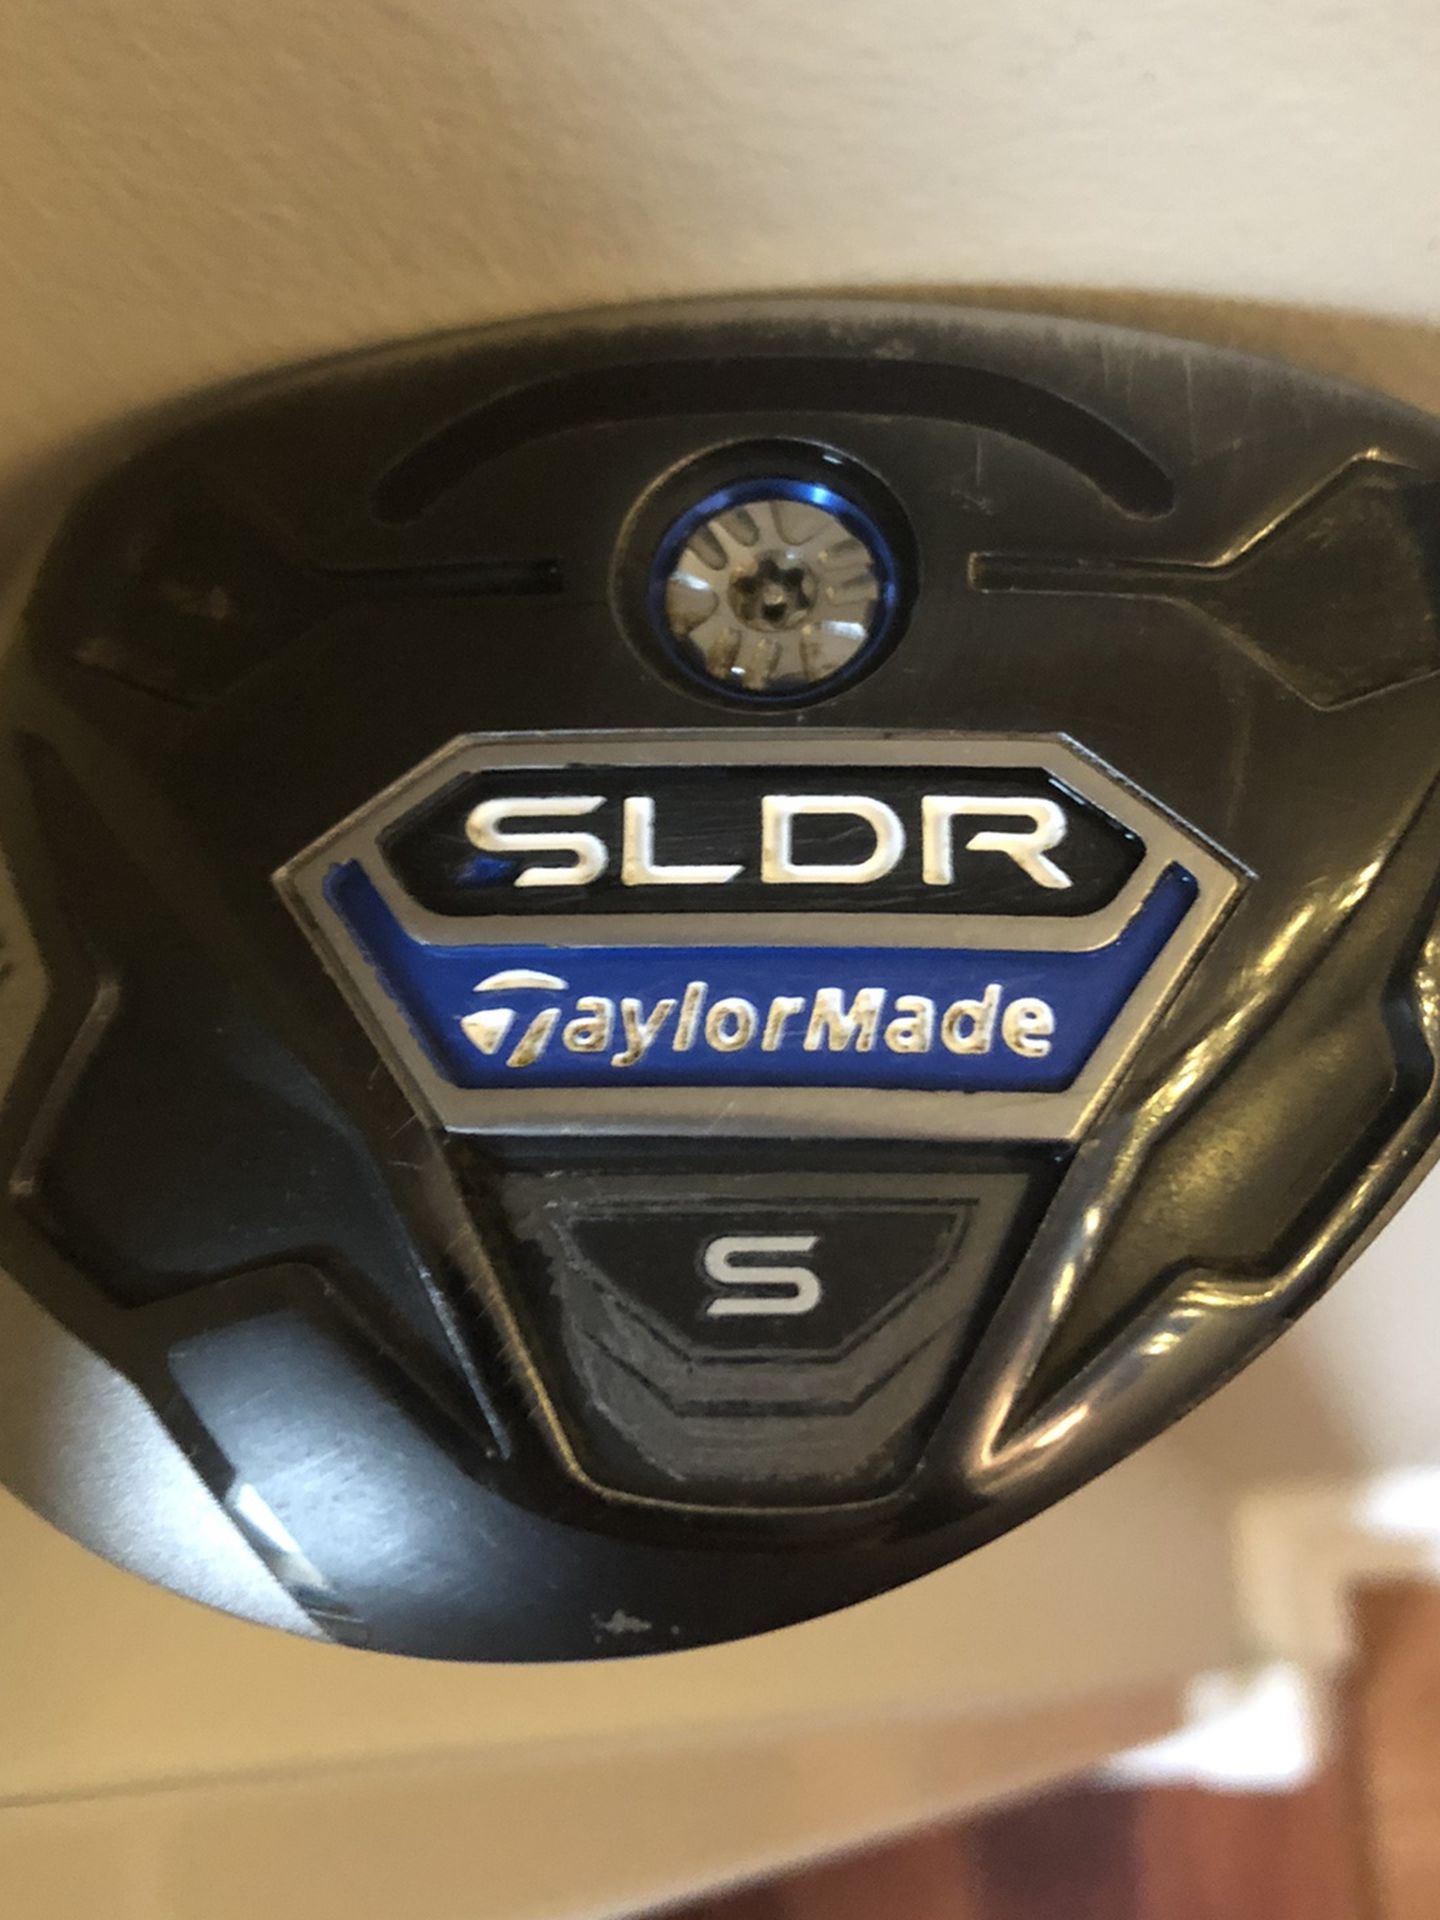 Taylor Made 3 Wood - Graphite Shaft